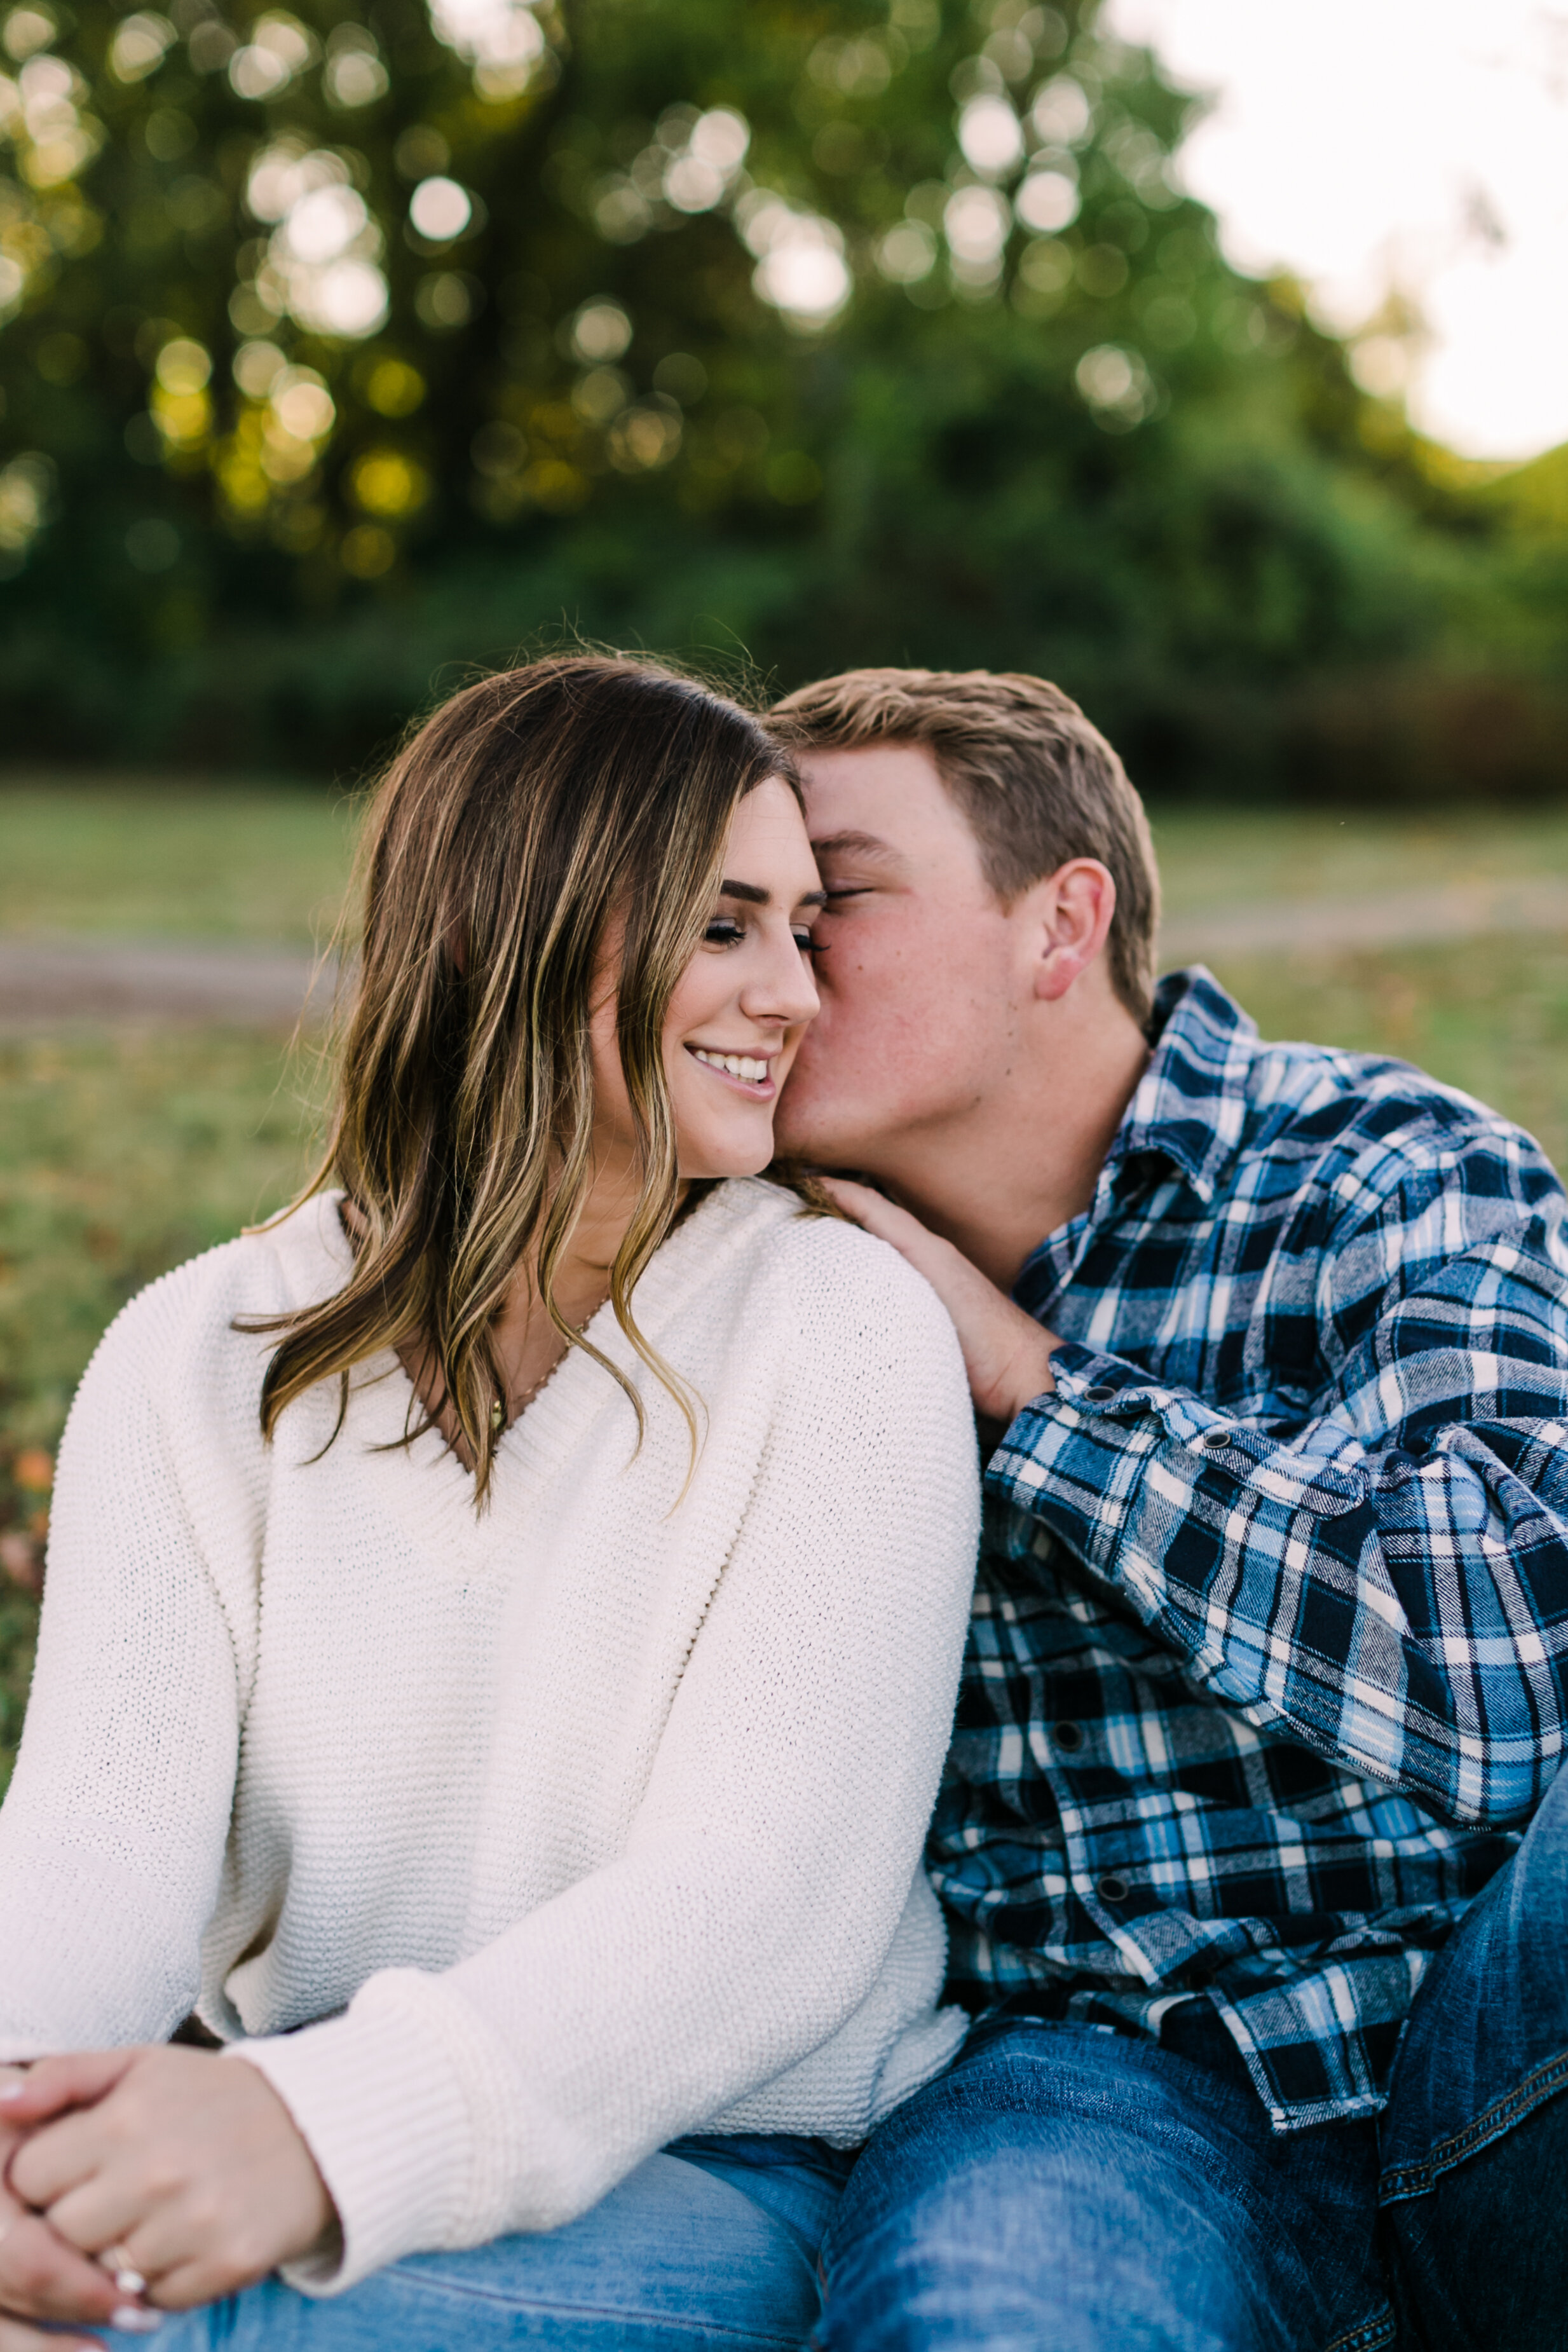 Tennessee+Fall+Engagement+Photos+Puppy (13 of 63).jpg